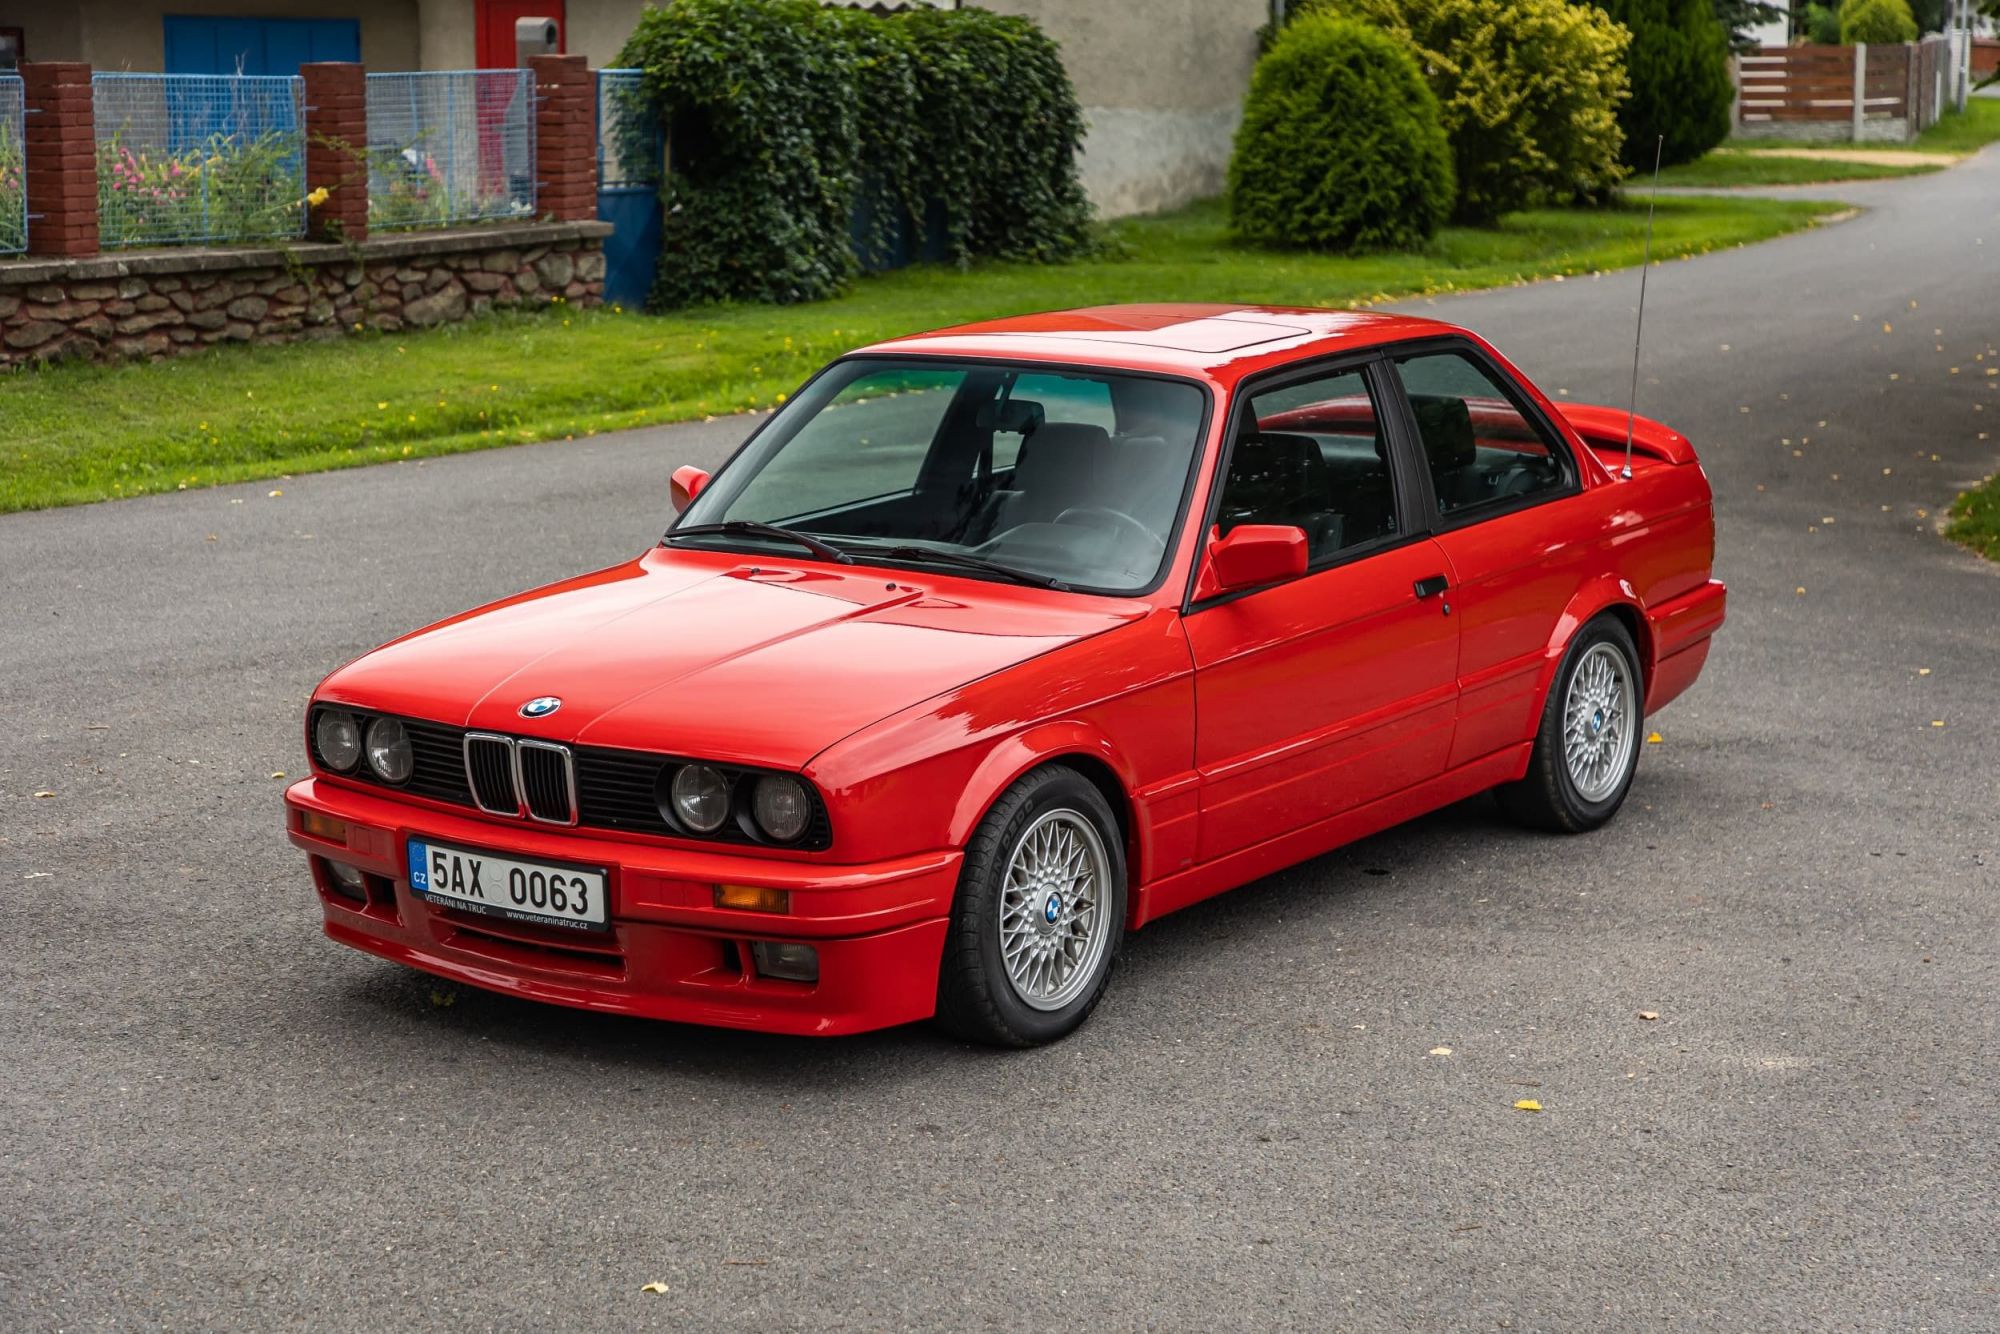 https://www.auctomobile.com/data/media/foto/large/0-bmw-e30-318is-red-48-.jpg